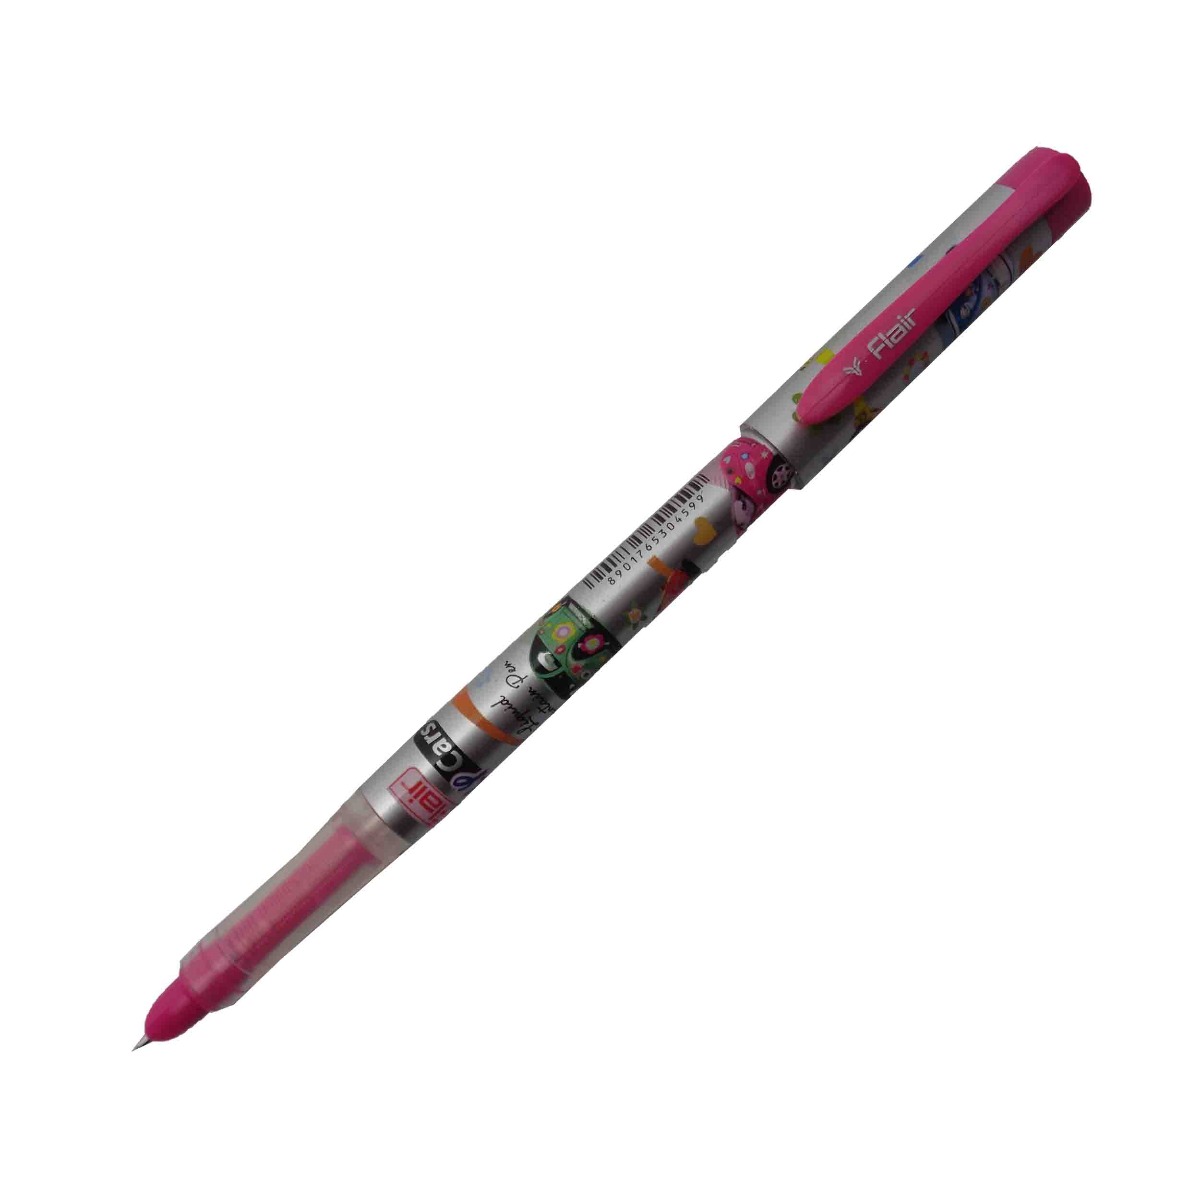 Flair Inky cars Model: 15355 Grey color design body with Pink clip fine tip with 2 ink cartridge cap type fountain pen